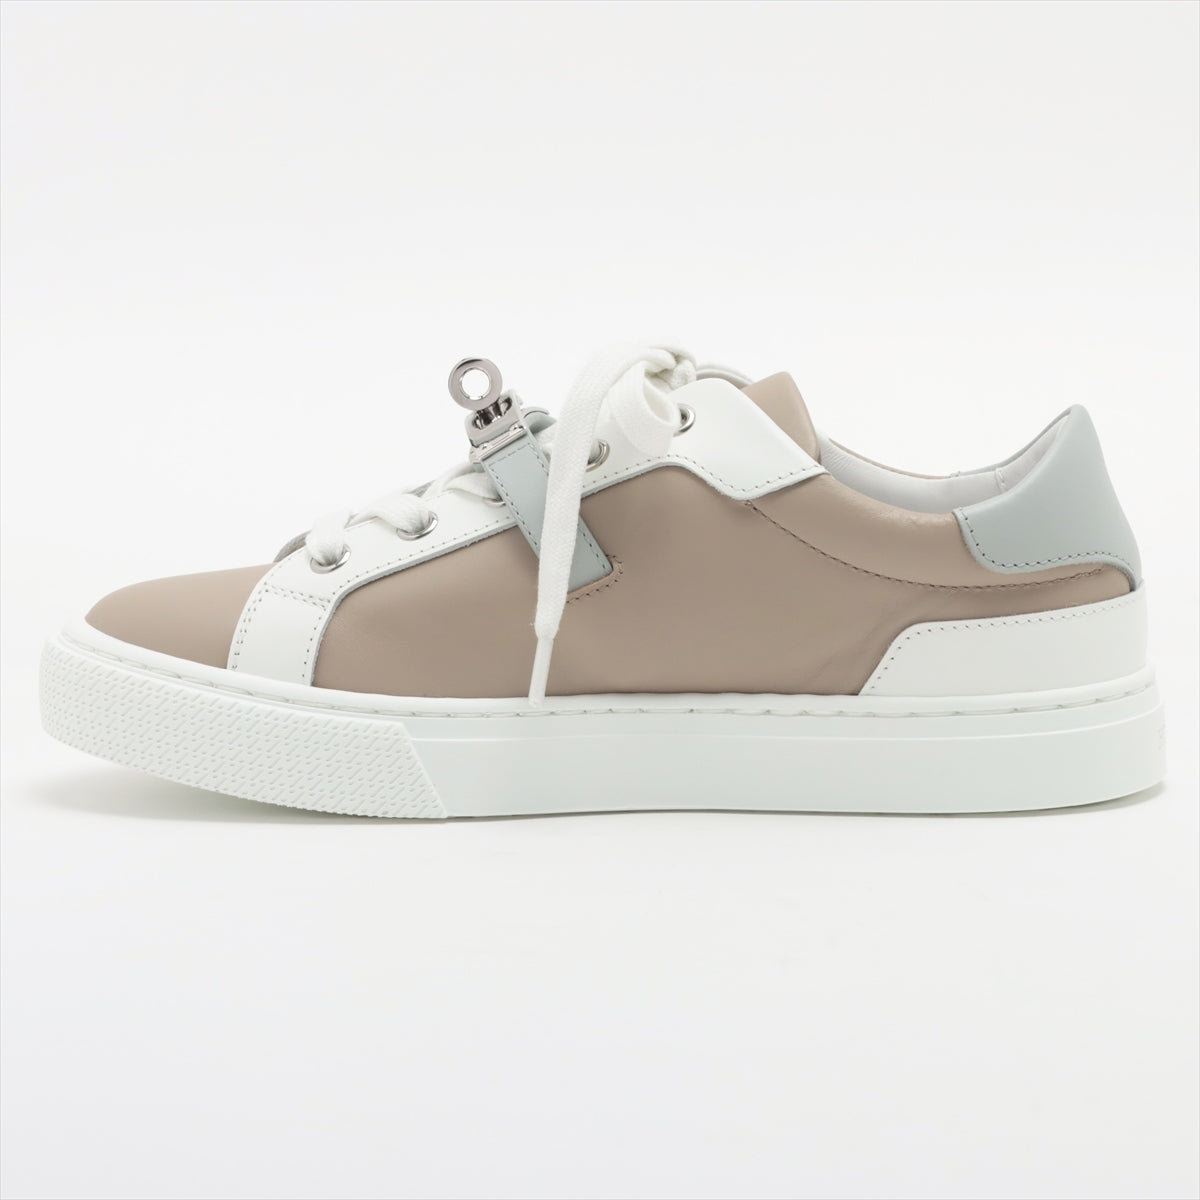 Hermès Leather Sneakers 35 Ladies' White x beige Day Kelly metal fittings box sack There is a replacement string